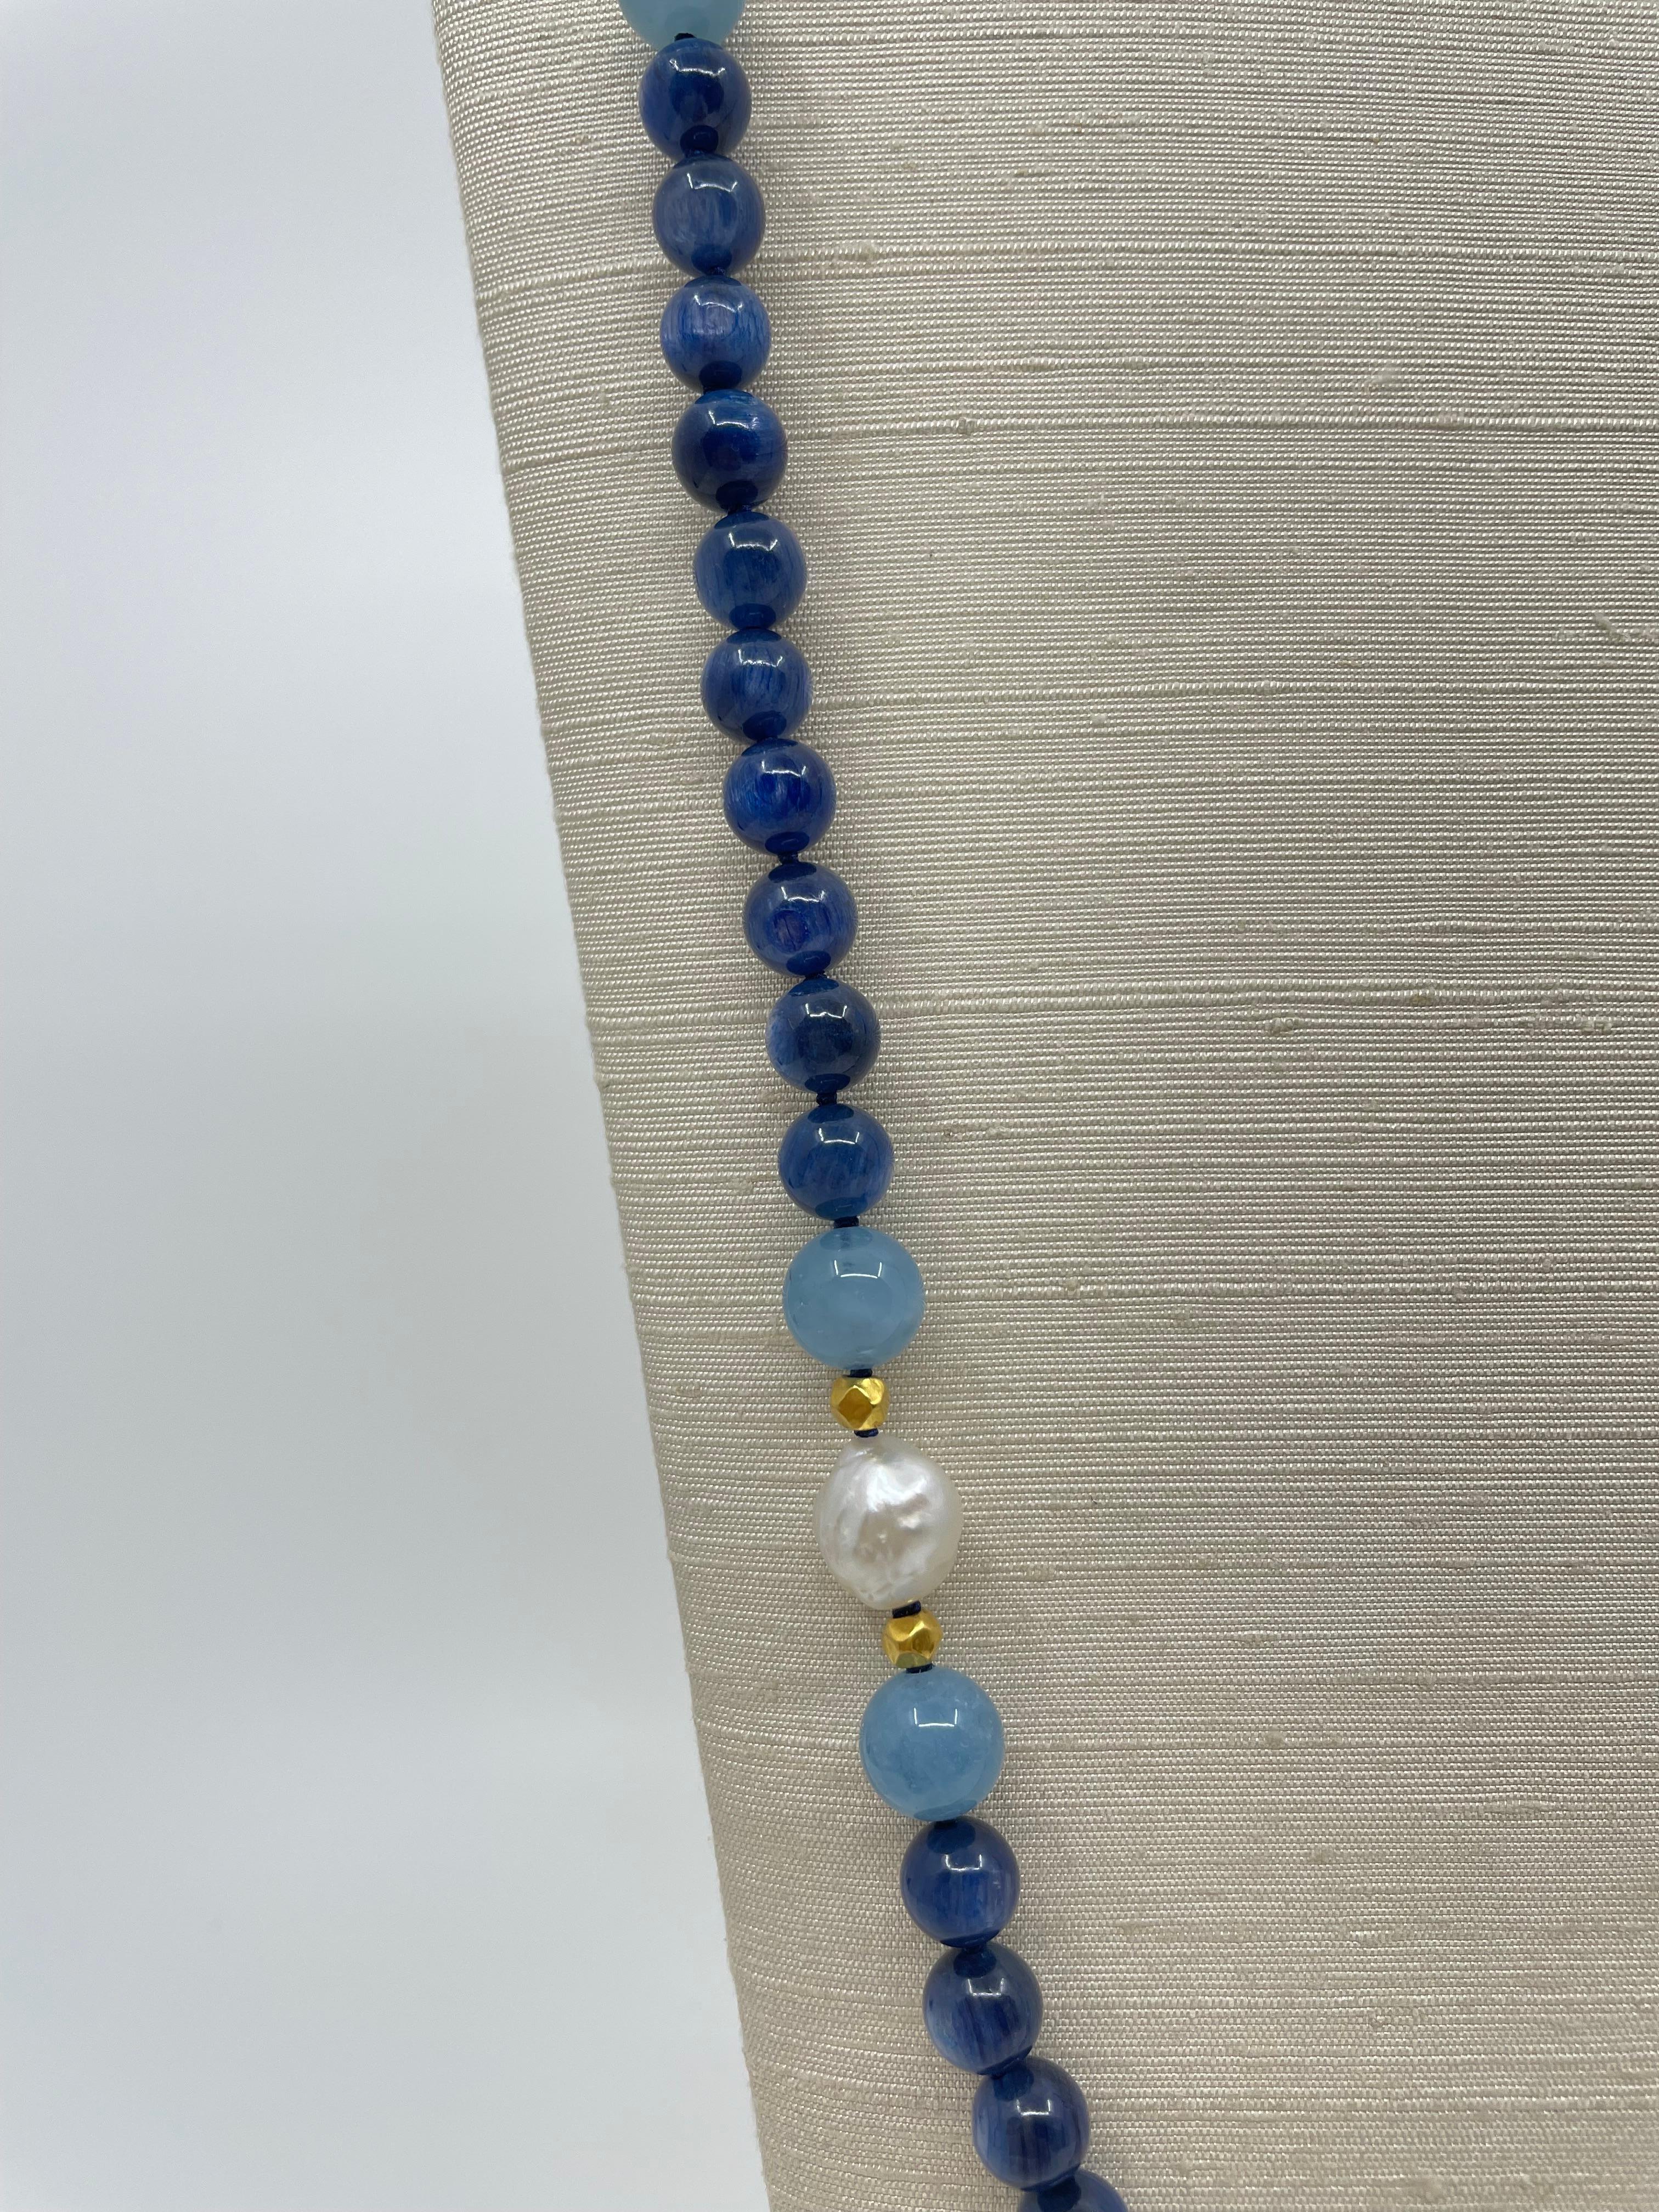 Women's or Men's Long Necklace with Kyanite, Aquamarine, South Sea Pearls & 18K Solid Gold Beads For Sale